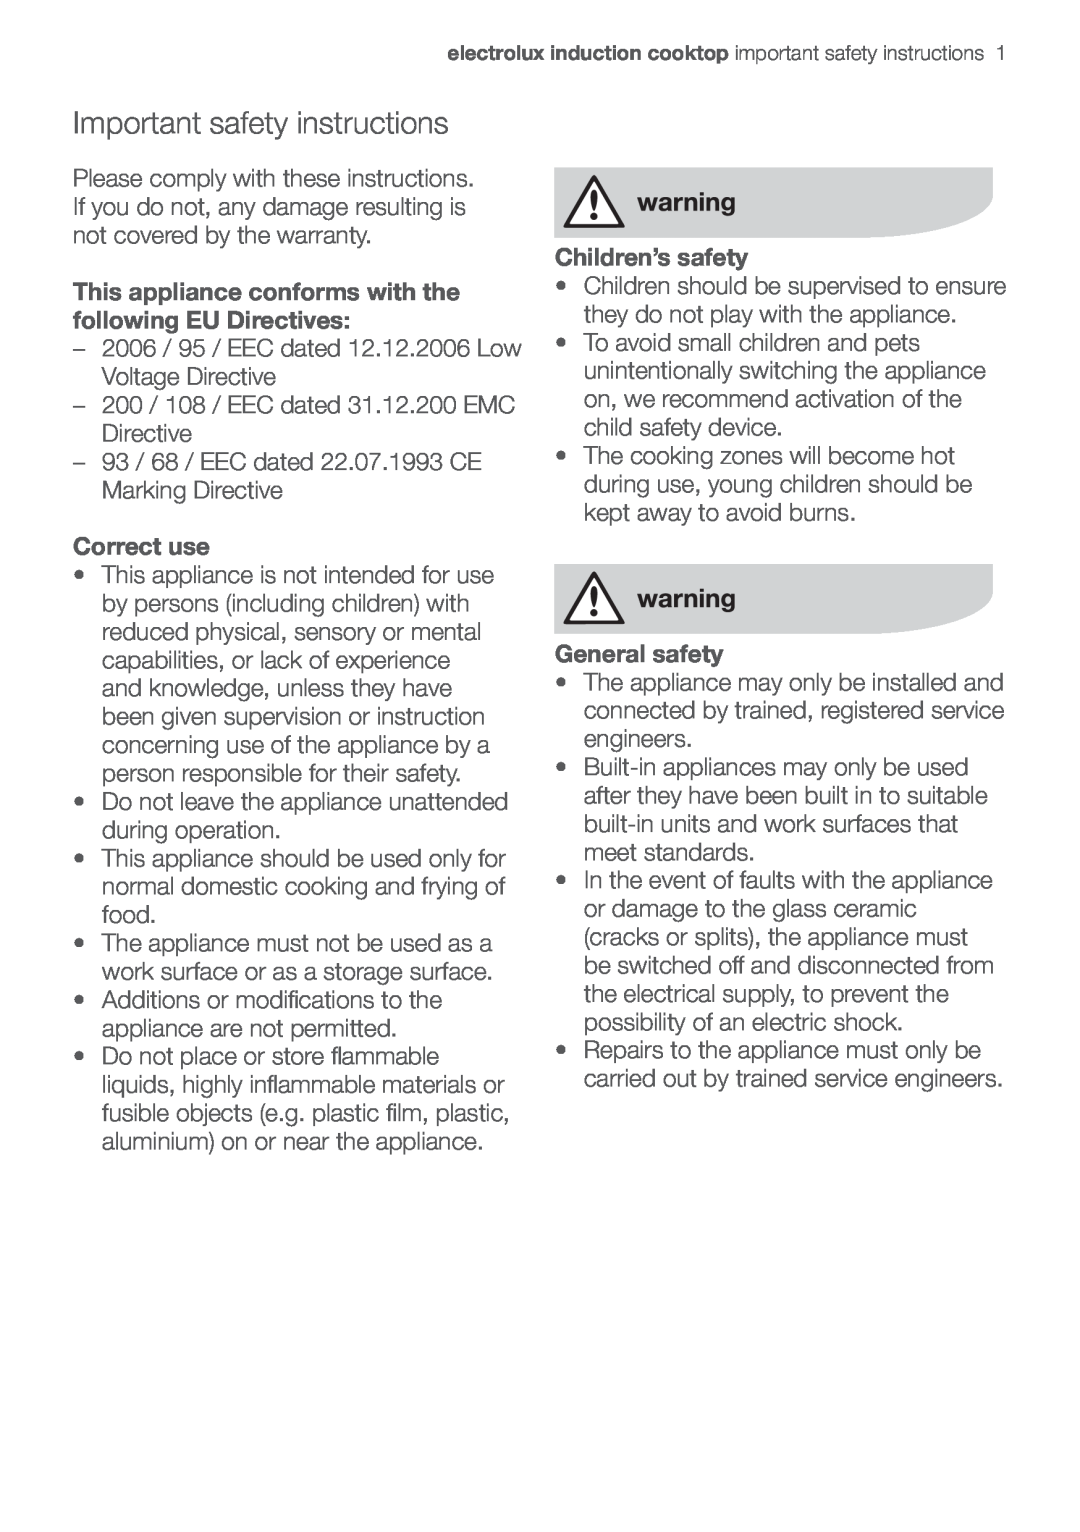 Electrolux EHD90LLUM Important safety instructions, This appliance conforms with the following EU Directives, Correct use 